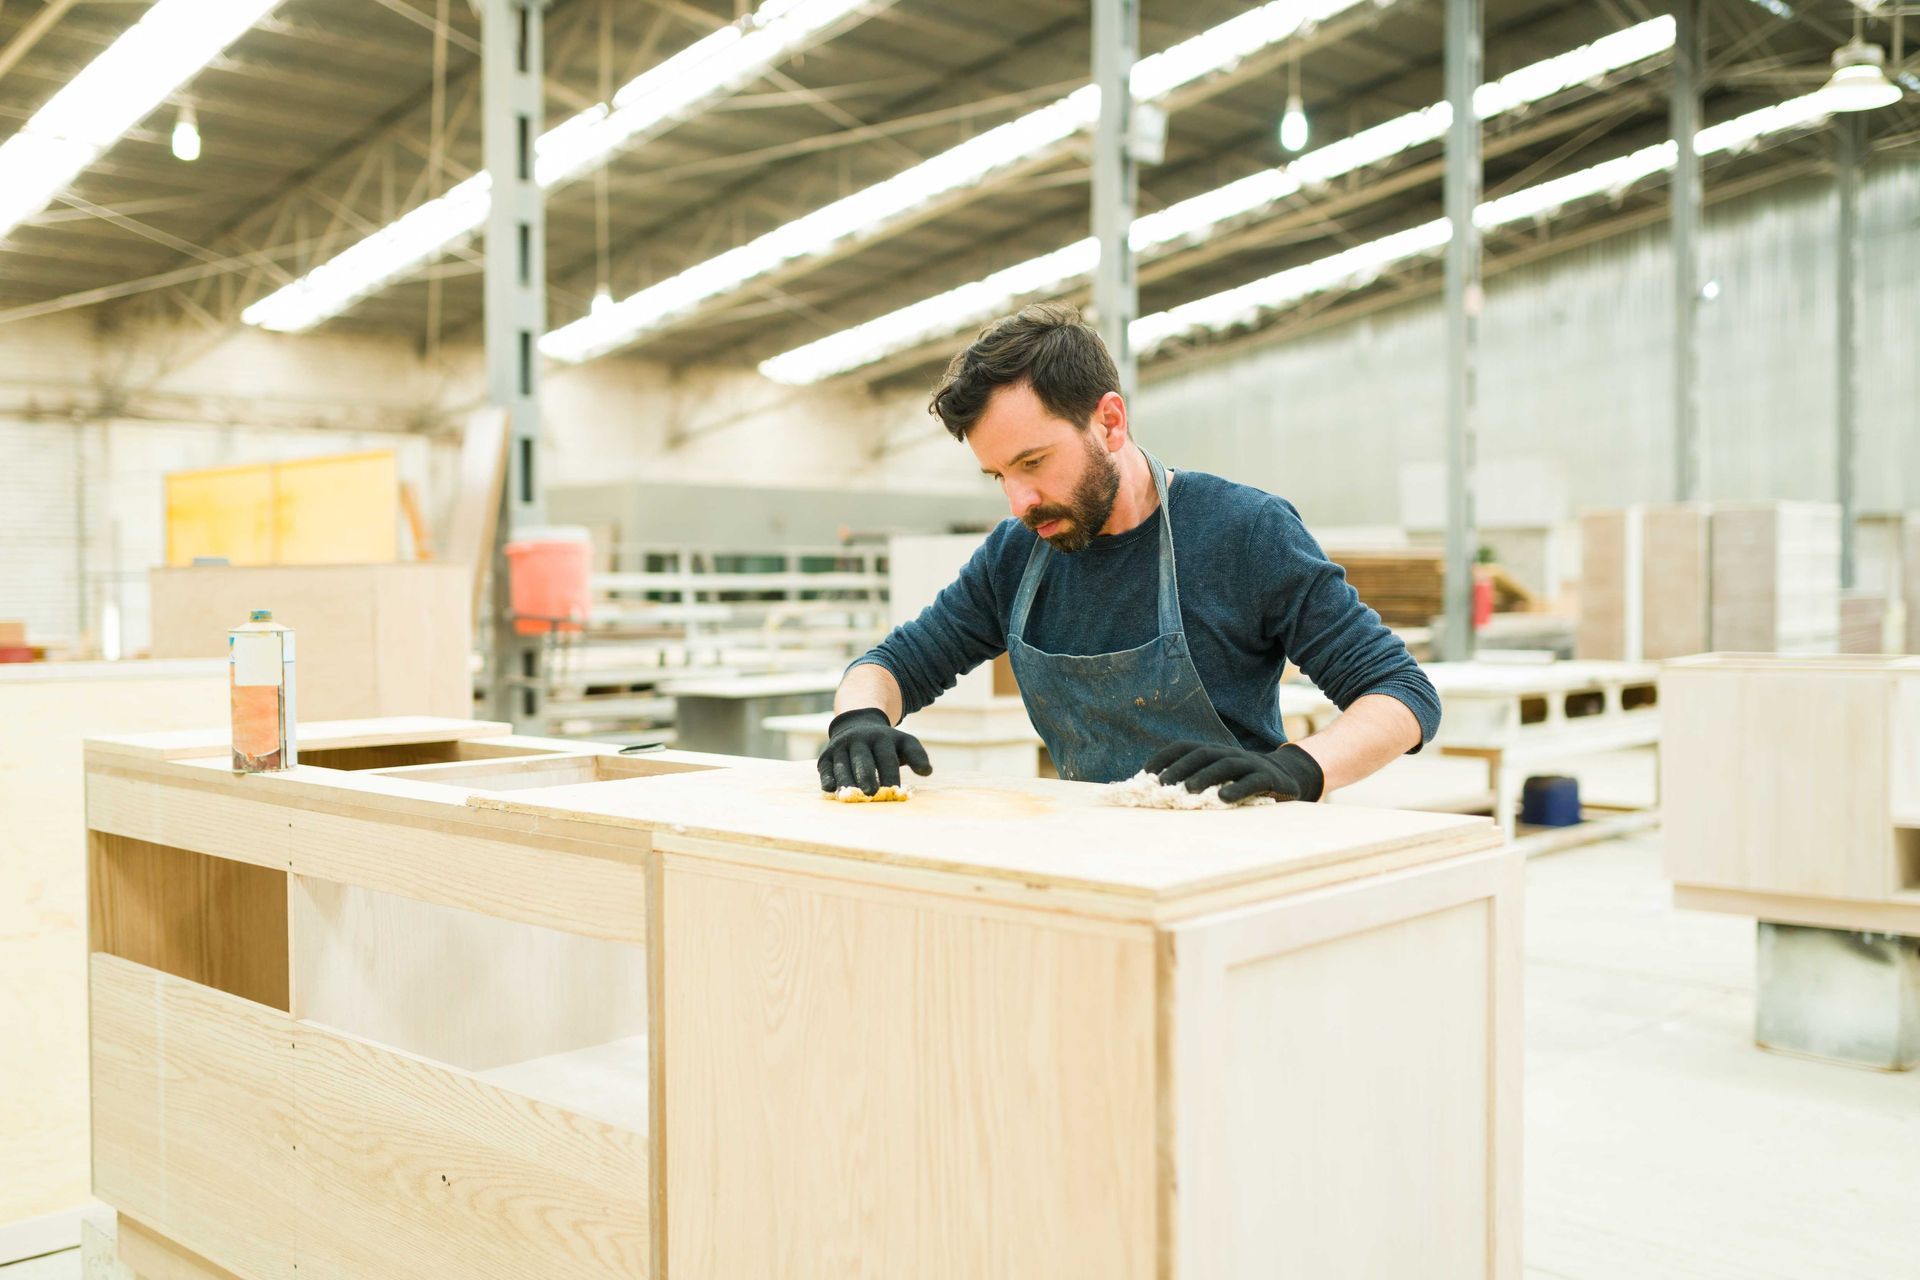 A man building cabinets in a warehouse